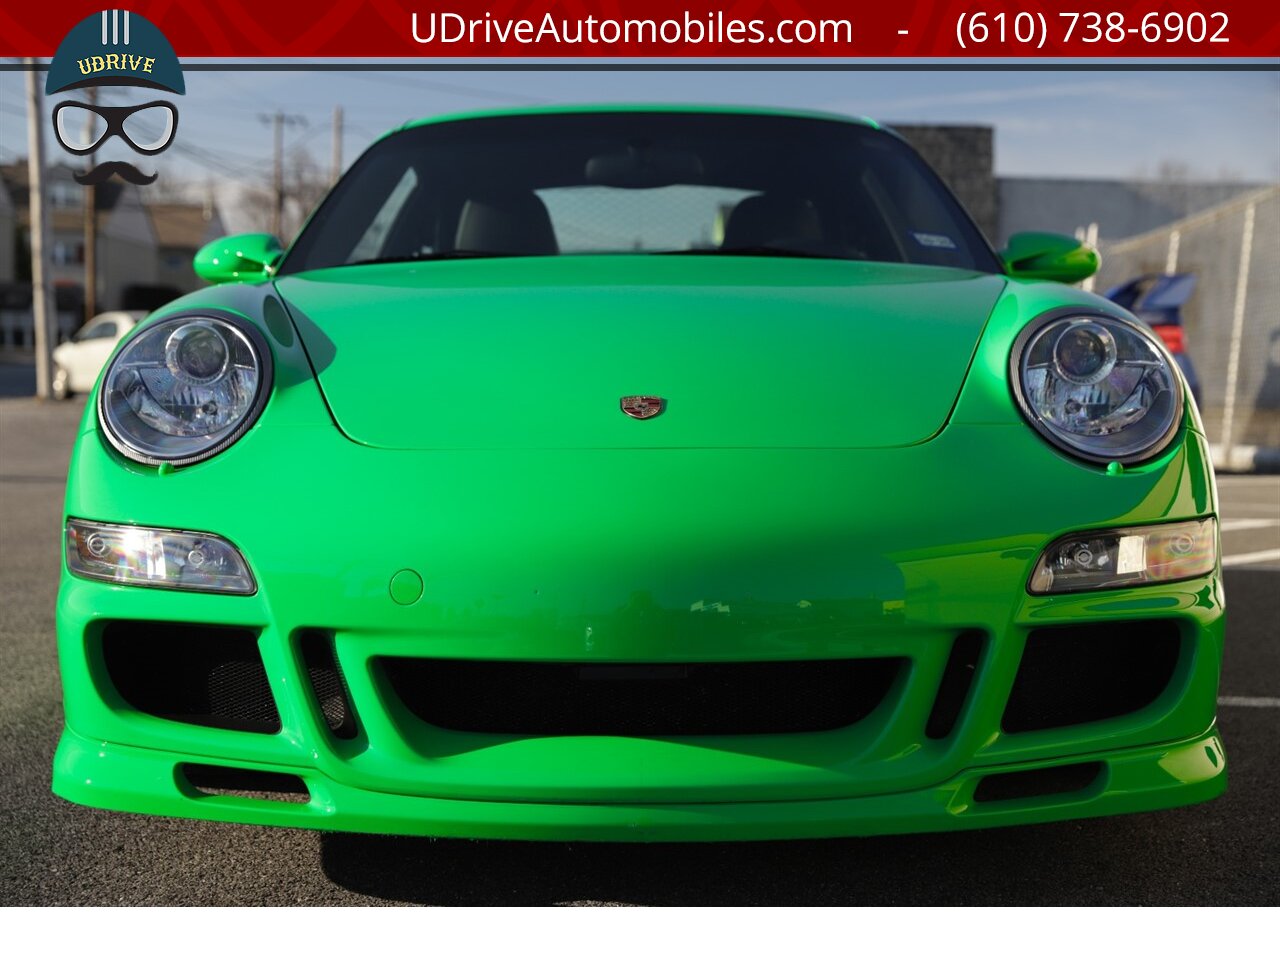 2008 Porsche 911 S 997 6Sp PTS RS Green AeroKit 1of a Kind  $118k MSRP Champion F77 Pkg RG5 Whls - Photo 14 - West Chester, PA 19382